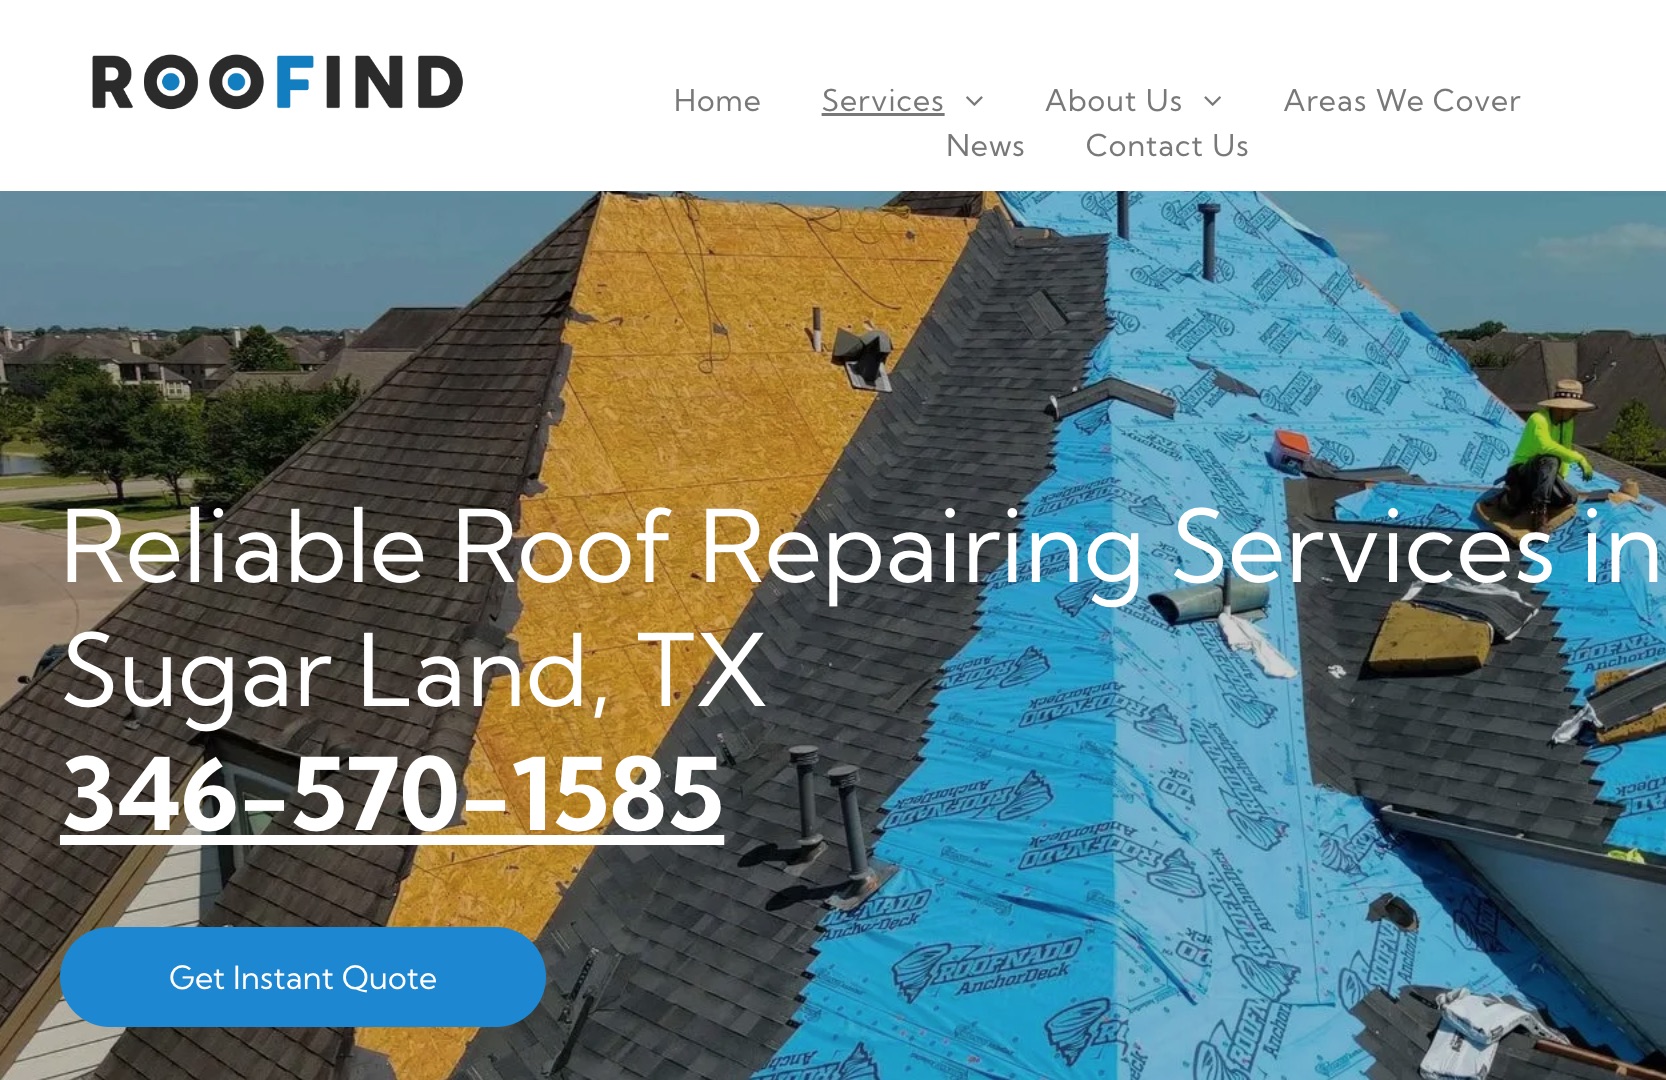 Decoding Excellence: A Closer Look at Roofind’s Roofing Mastery